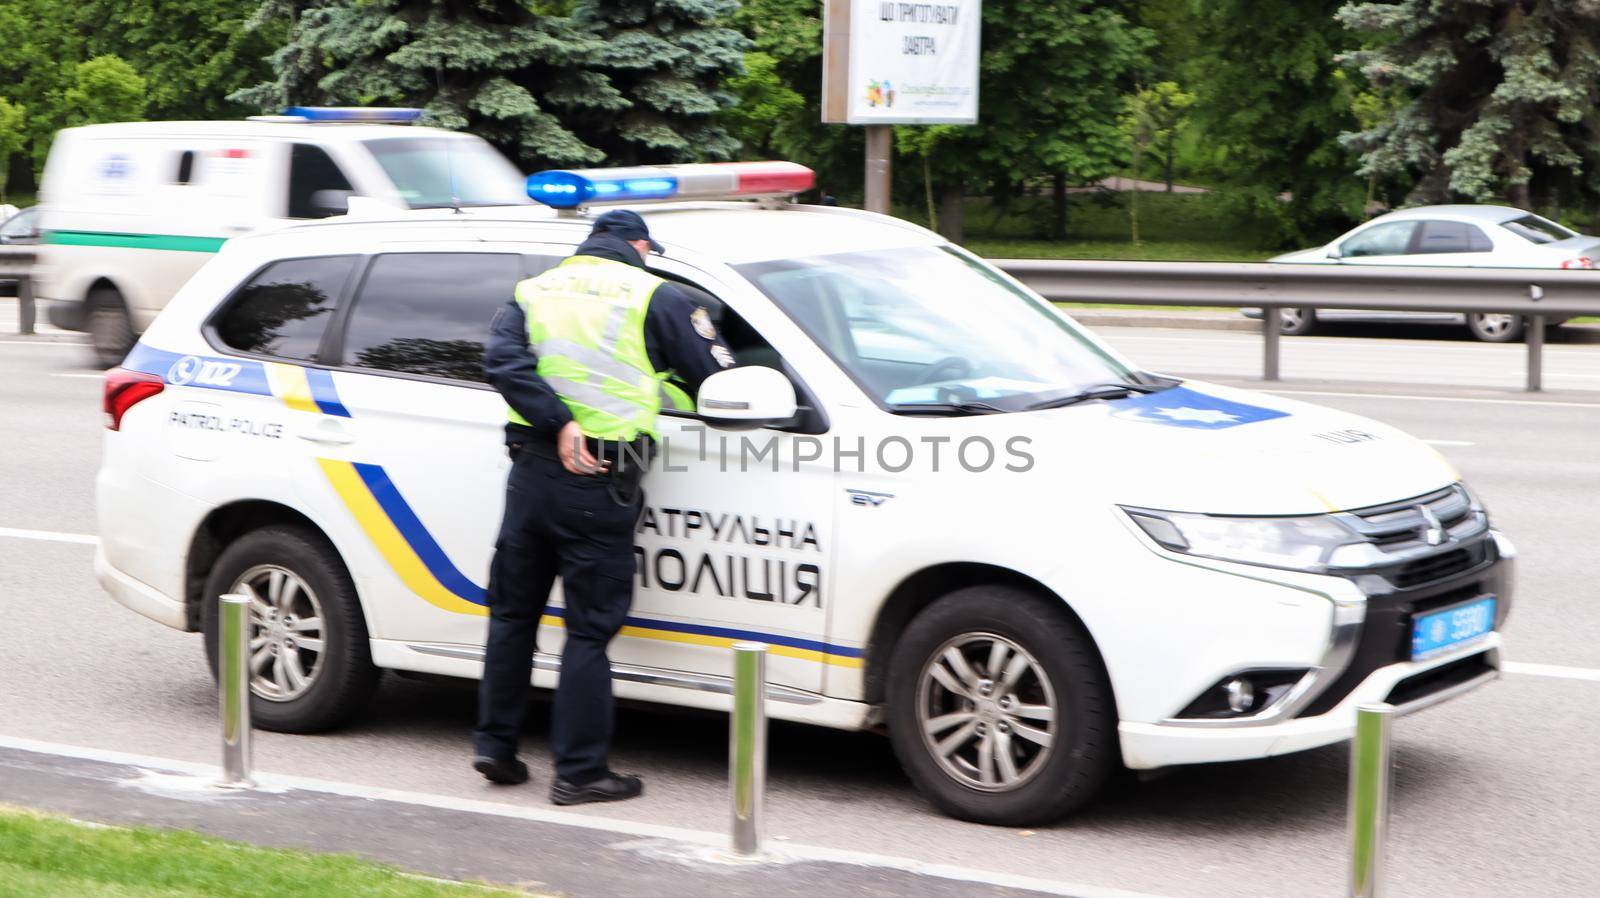 Ukraine, Kiev - June 2, 2020. Police patrol cars provide safety on the roads of Kiev in Ukraine. A male policeman stands near his car on the roadway.